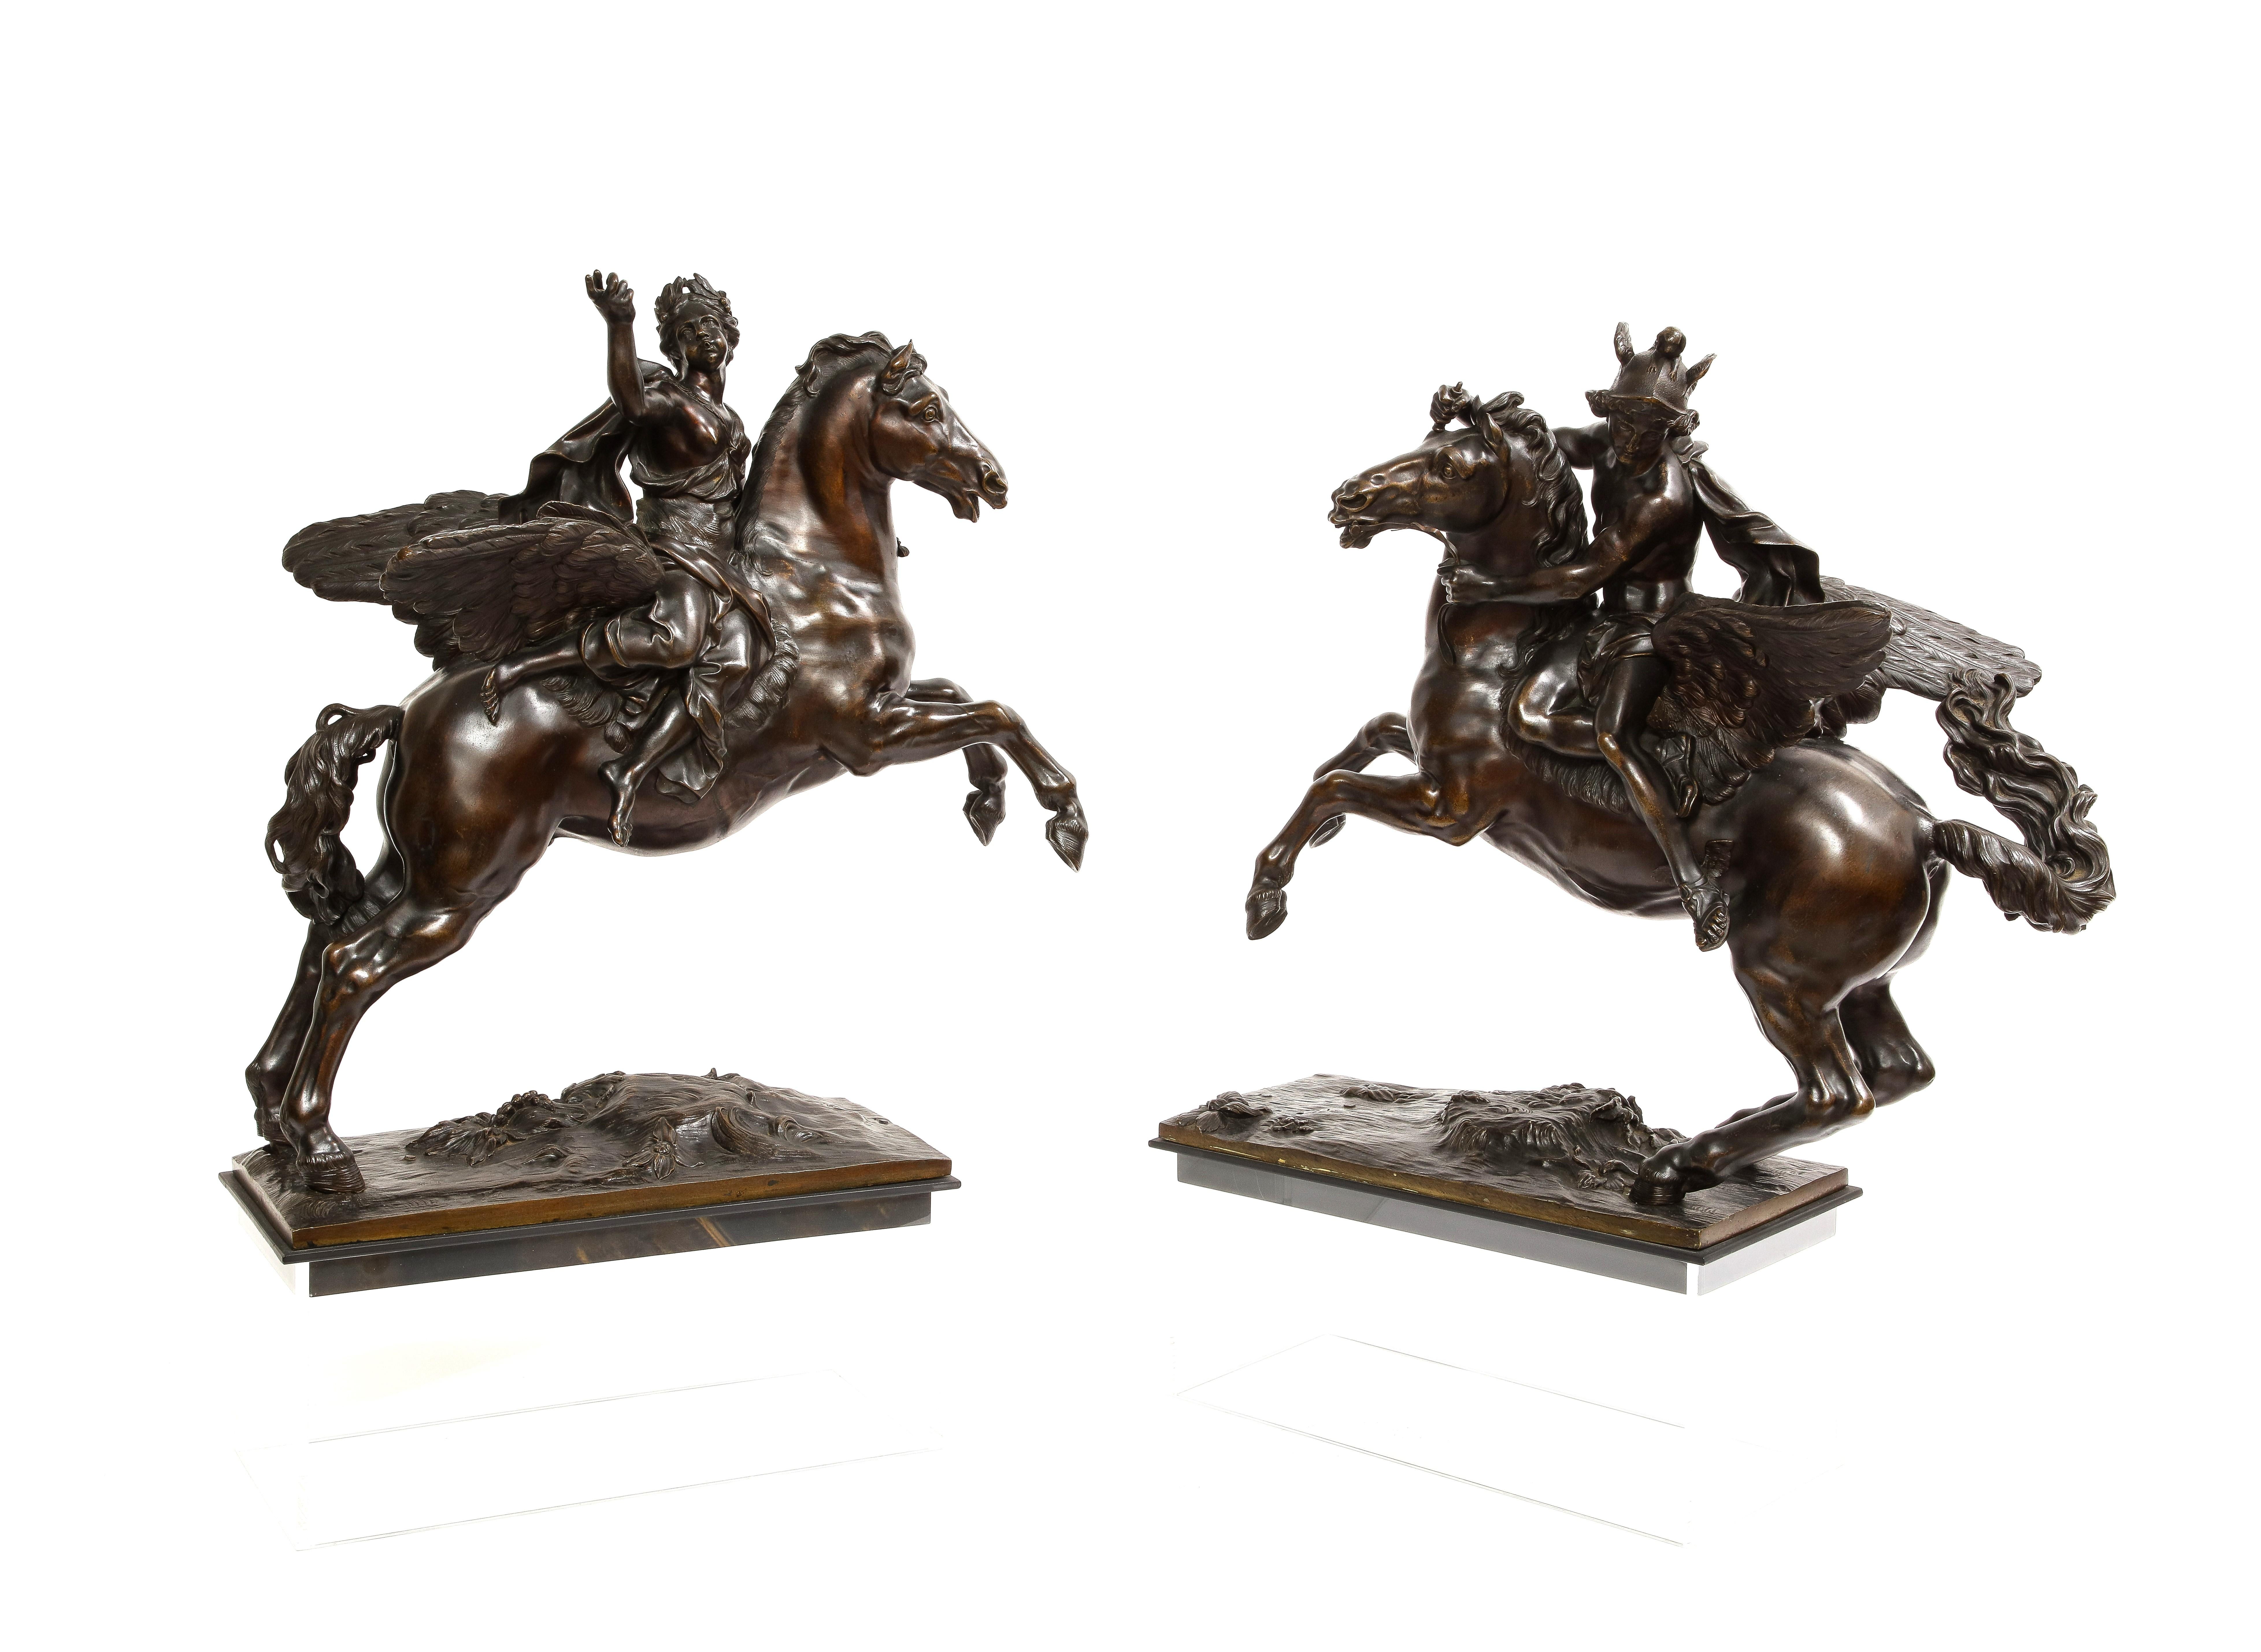 Patinated Pr. French 19th C. Bronze Groups Fame & Mercury After Models by Antoine Coysevox For Sale